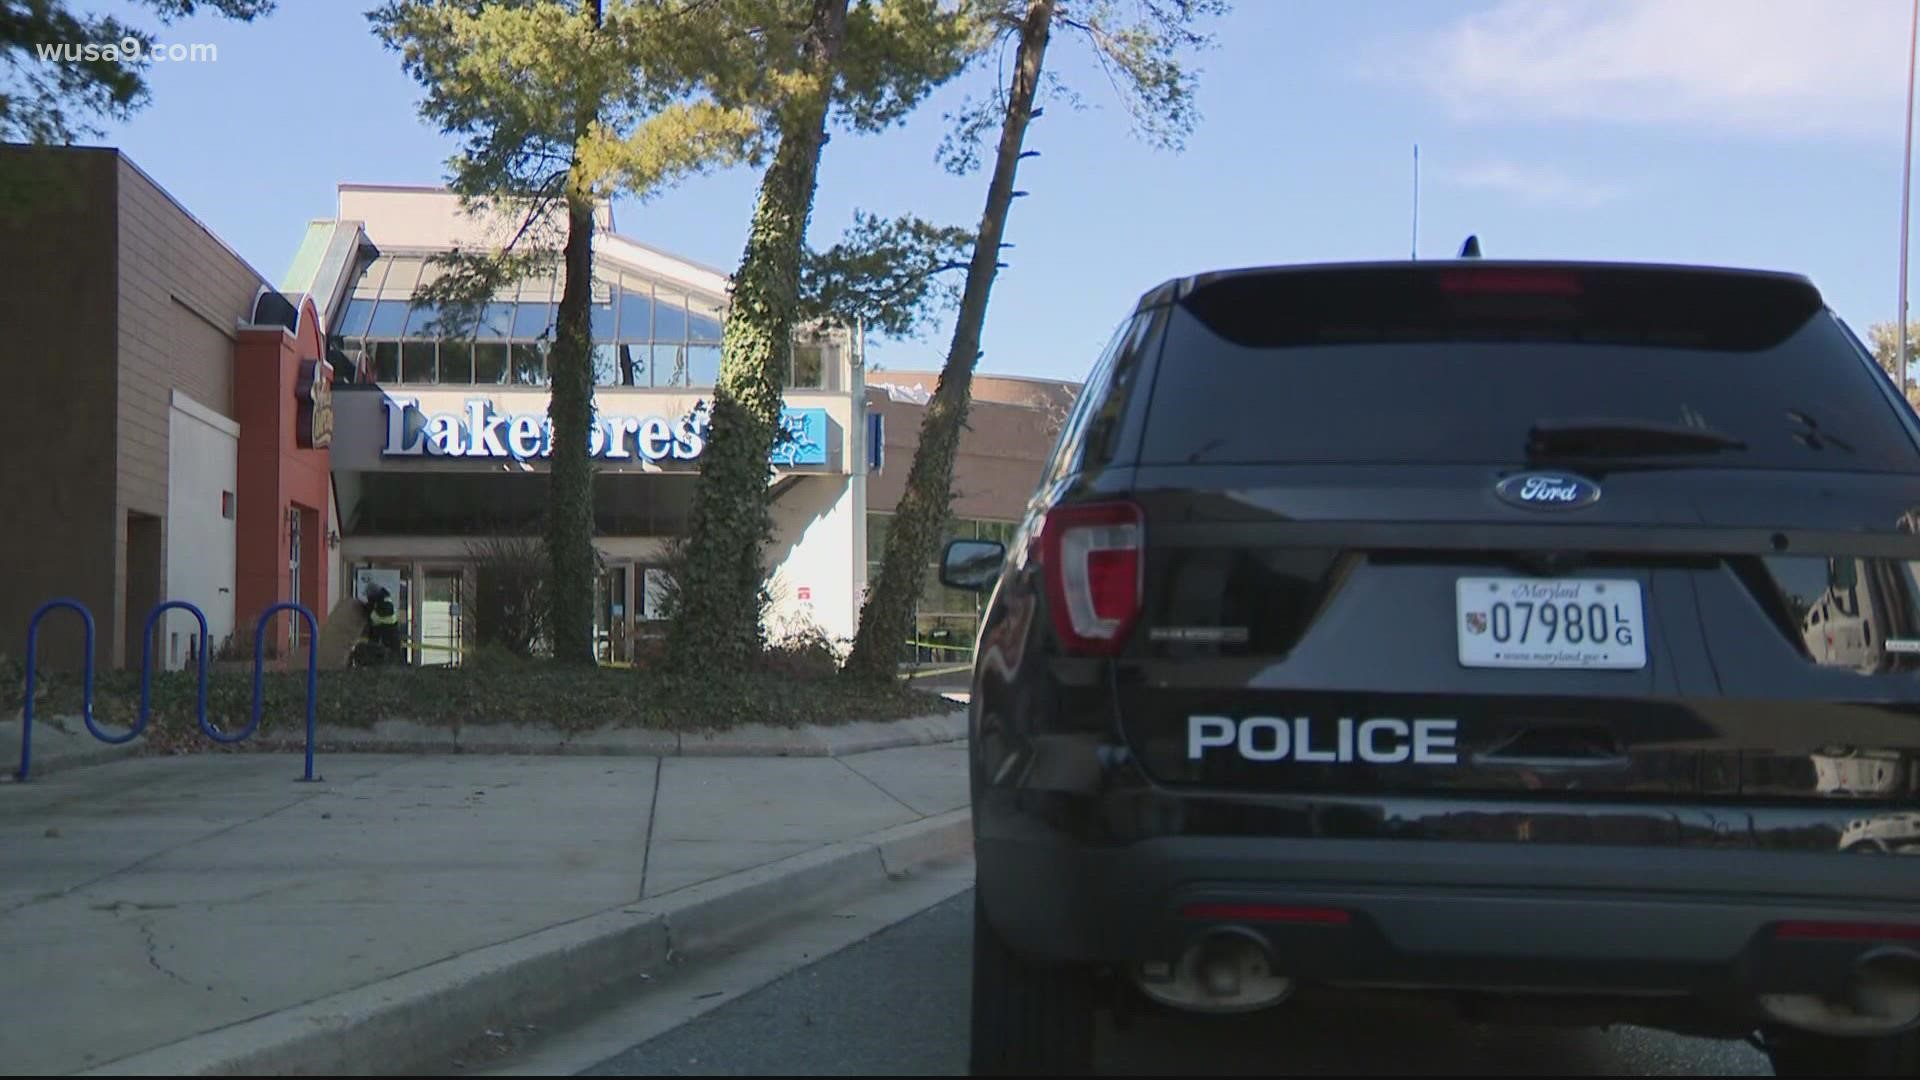 Police say the alleged aggravated assault occurred right when the mall opened for the day.